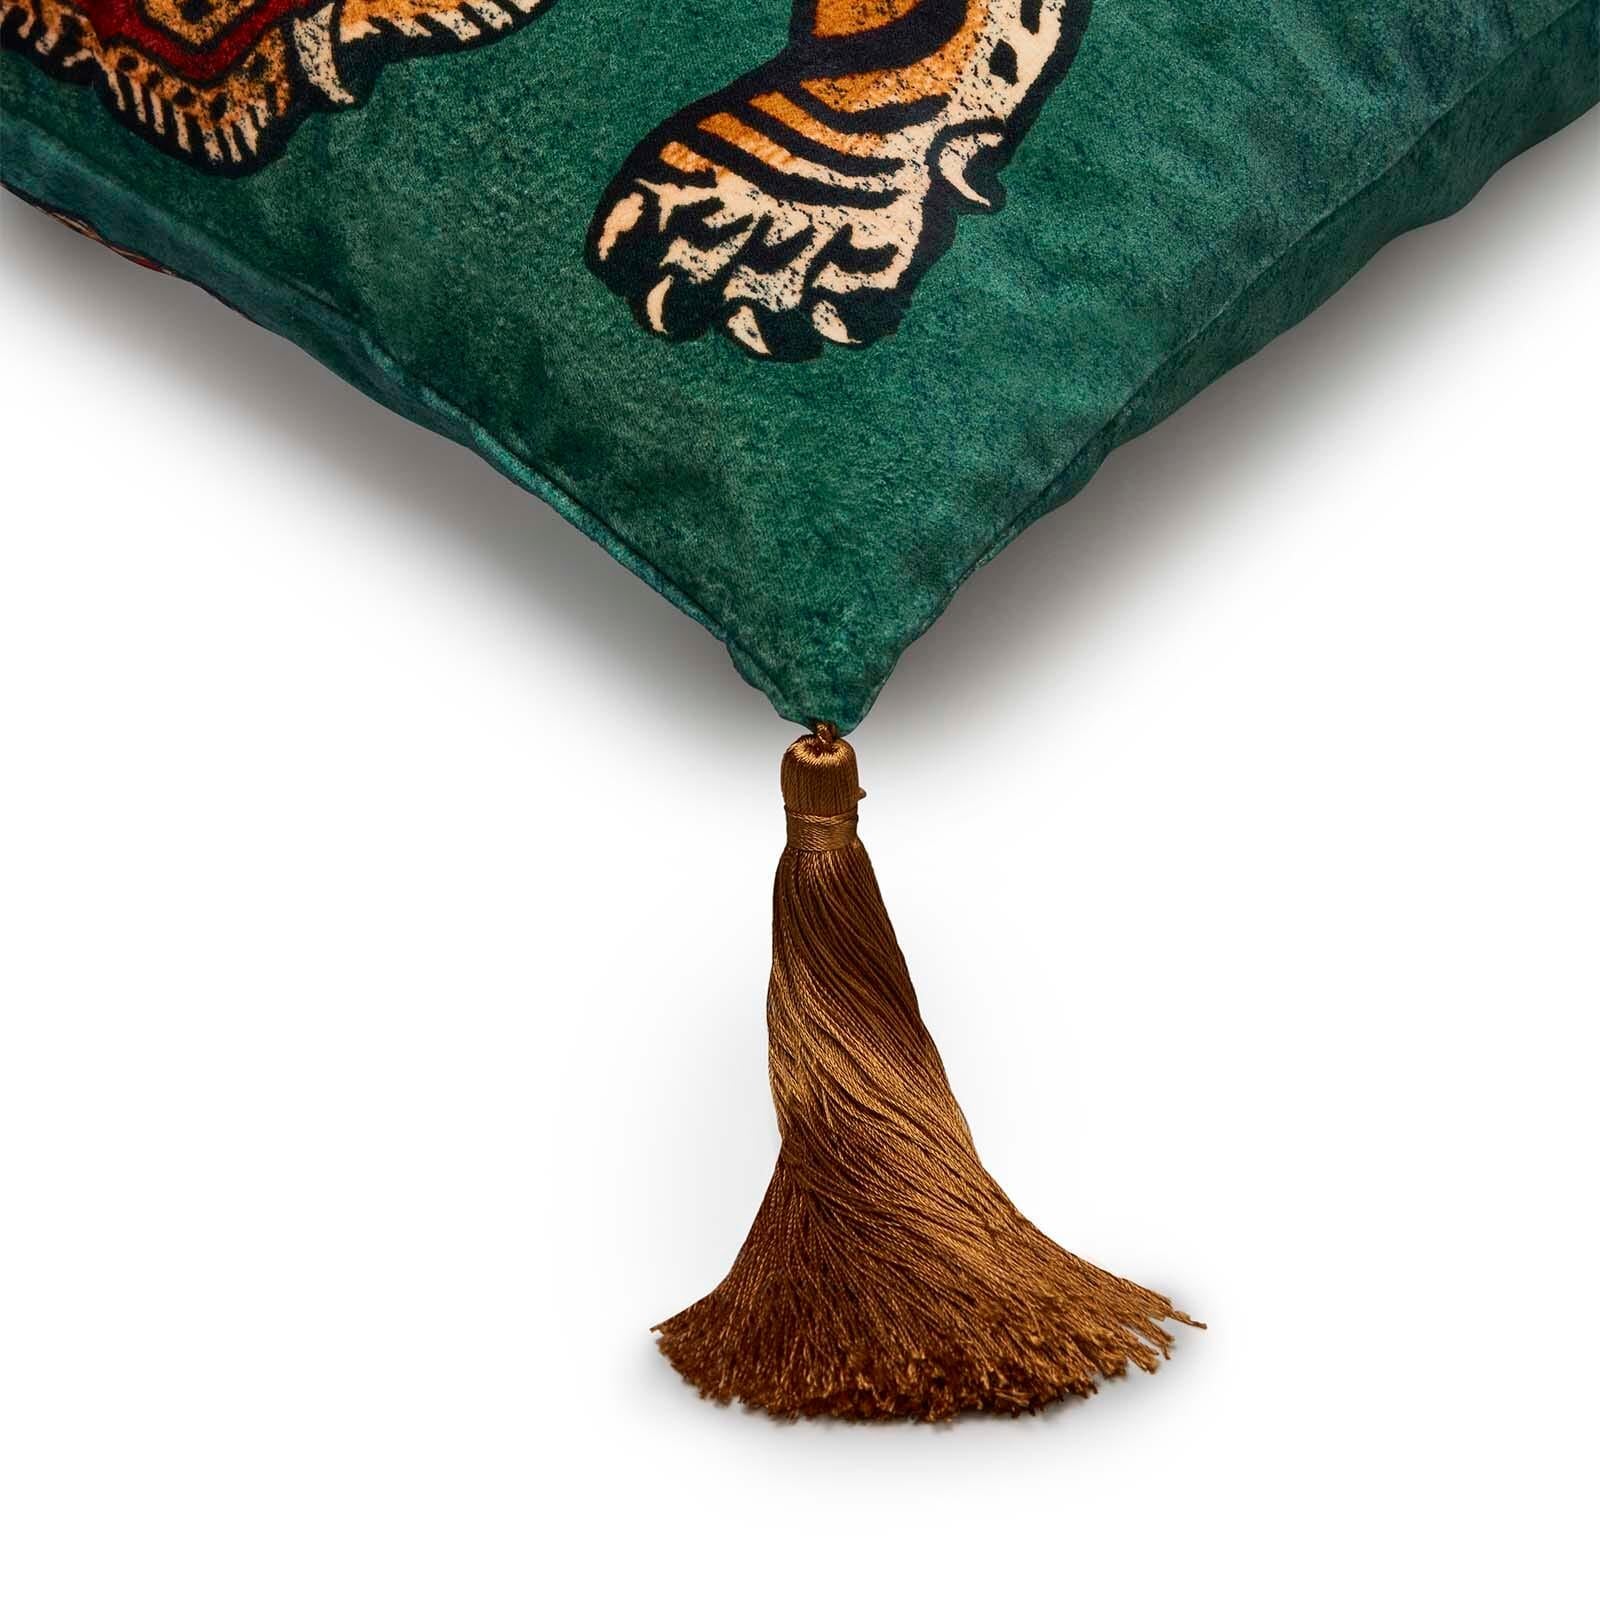 Elevate your sofa from simple to statement with this medium velvet cushion in ‘Emerald’. Featuring SABER the Tibetan tiger, this tasselled design will delight animal lovers and interiors enthusiasts alike. 

House of Hackney donates a portion of the